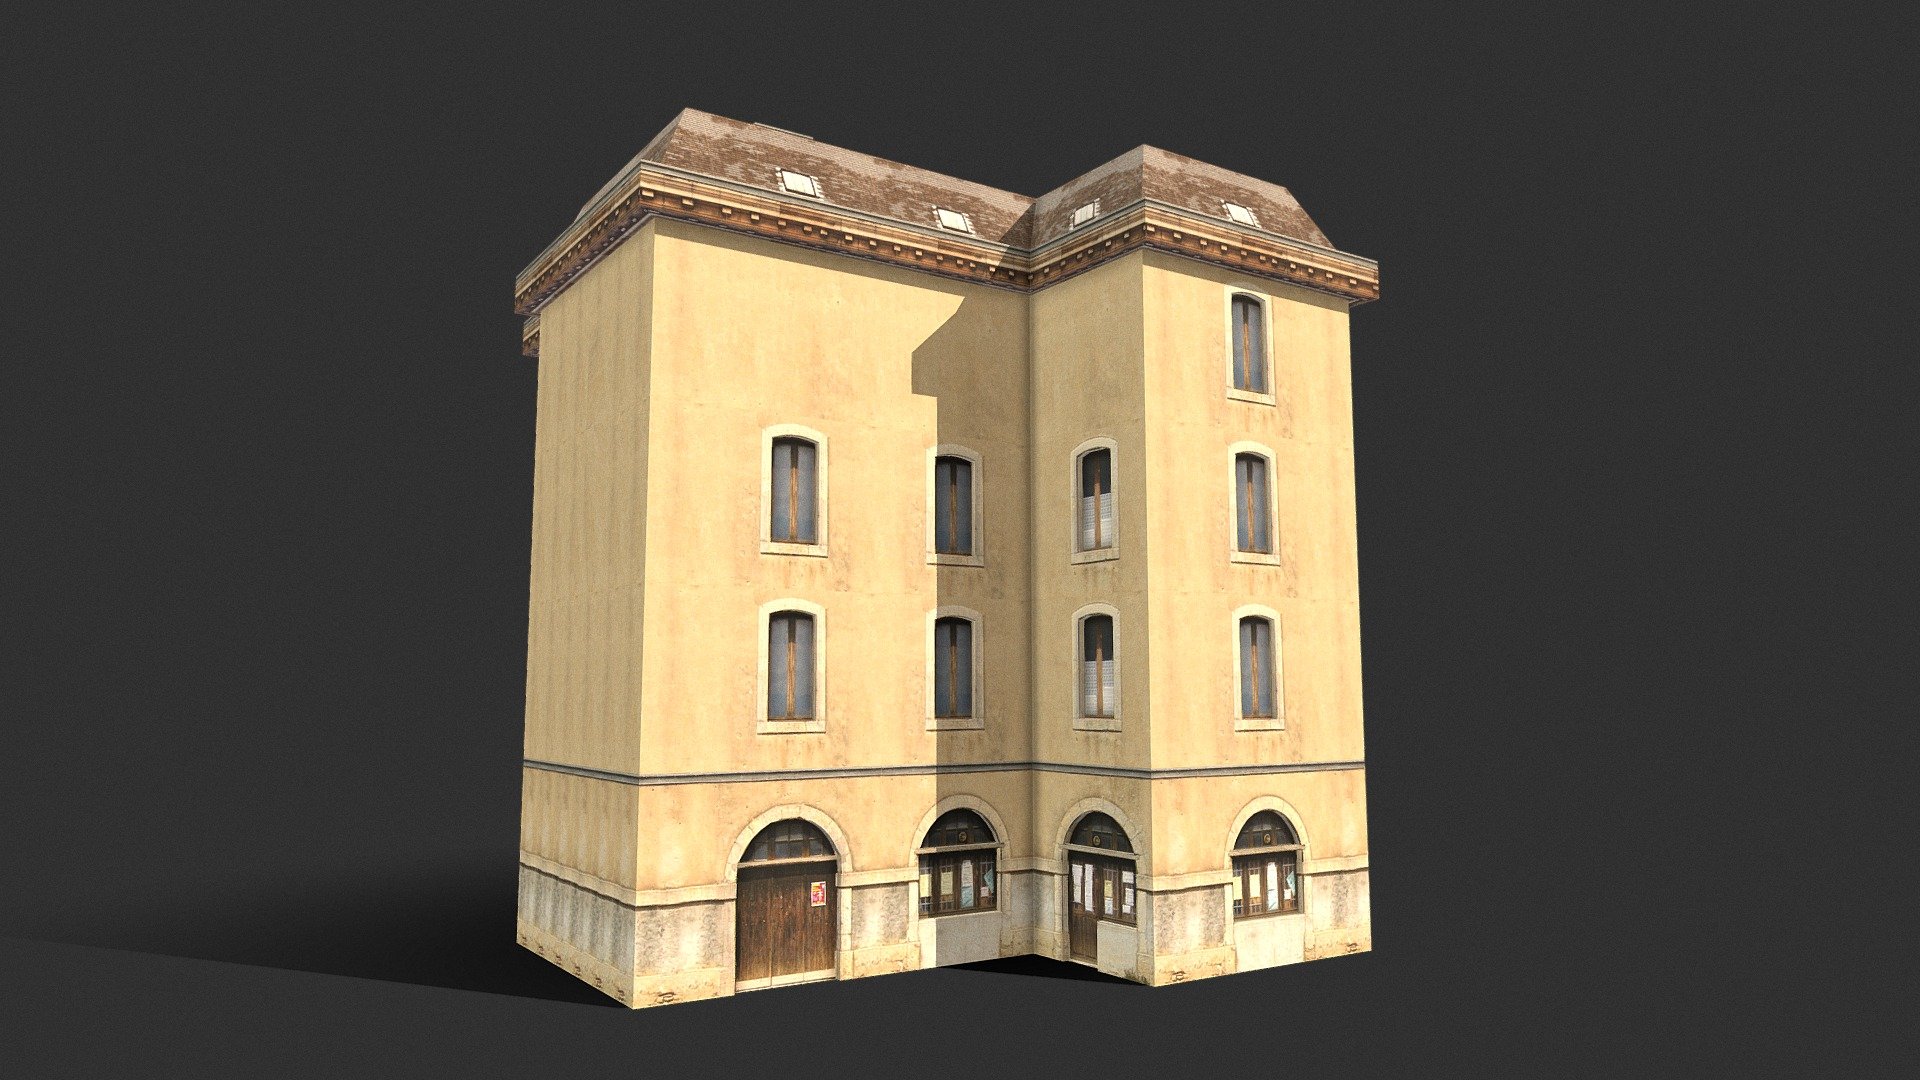 3D model of Old Apartment House

Resolution of textures:  1024x512, 700x700(roof)
Originally created with 3ds Max 2017
Photorealistic Texture
Unit system is set to centimetre.
Model is built to real-world scale
Rendered in Vray and 

Special notes:
.fbx format is recommended for import in other 3d software. If your software doesn't support .fbx format, please use .3ds format; .obj, format was exported from 3ds Max 3d model